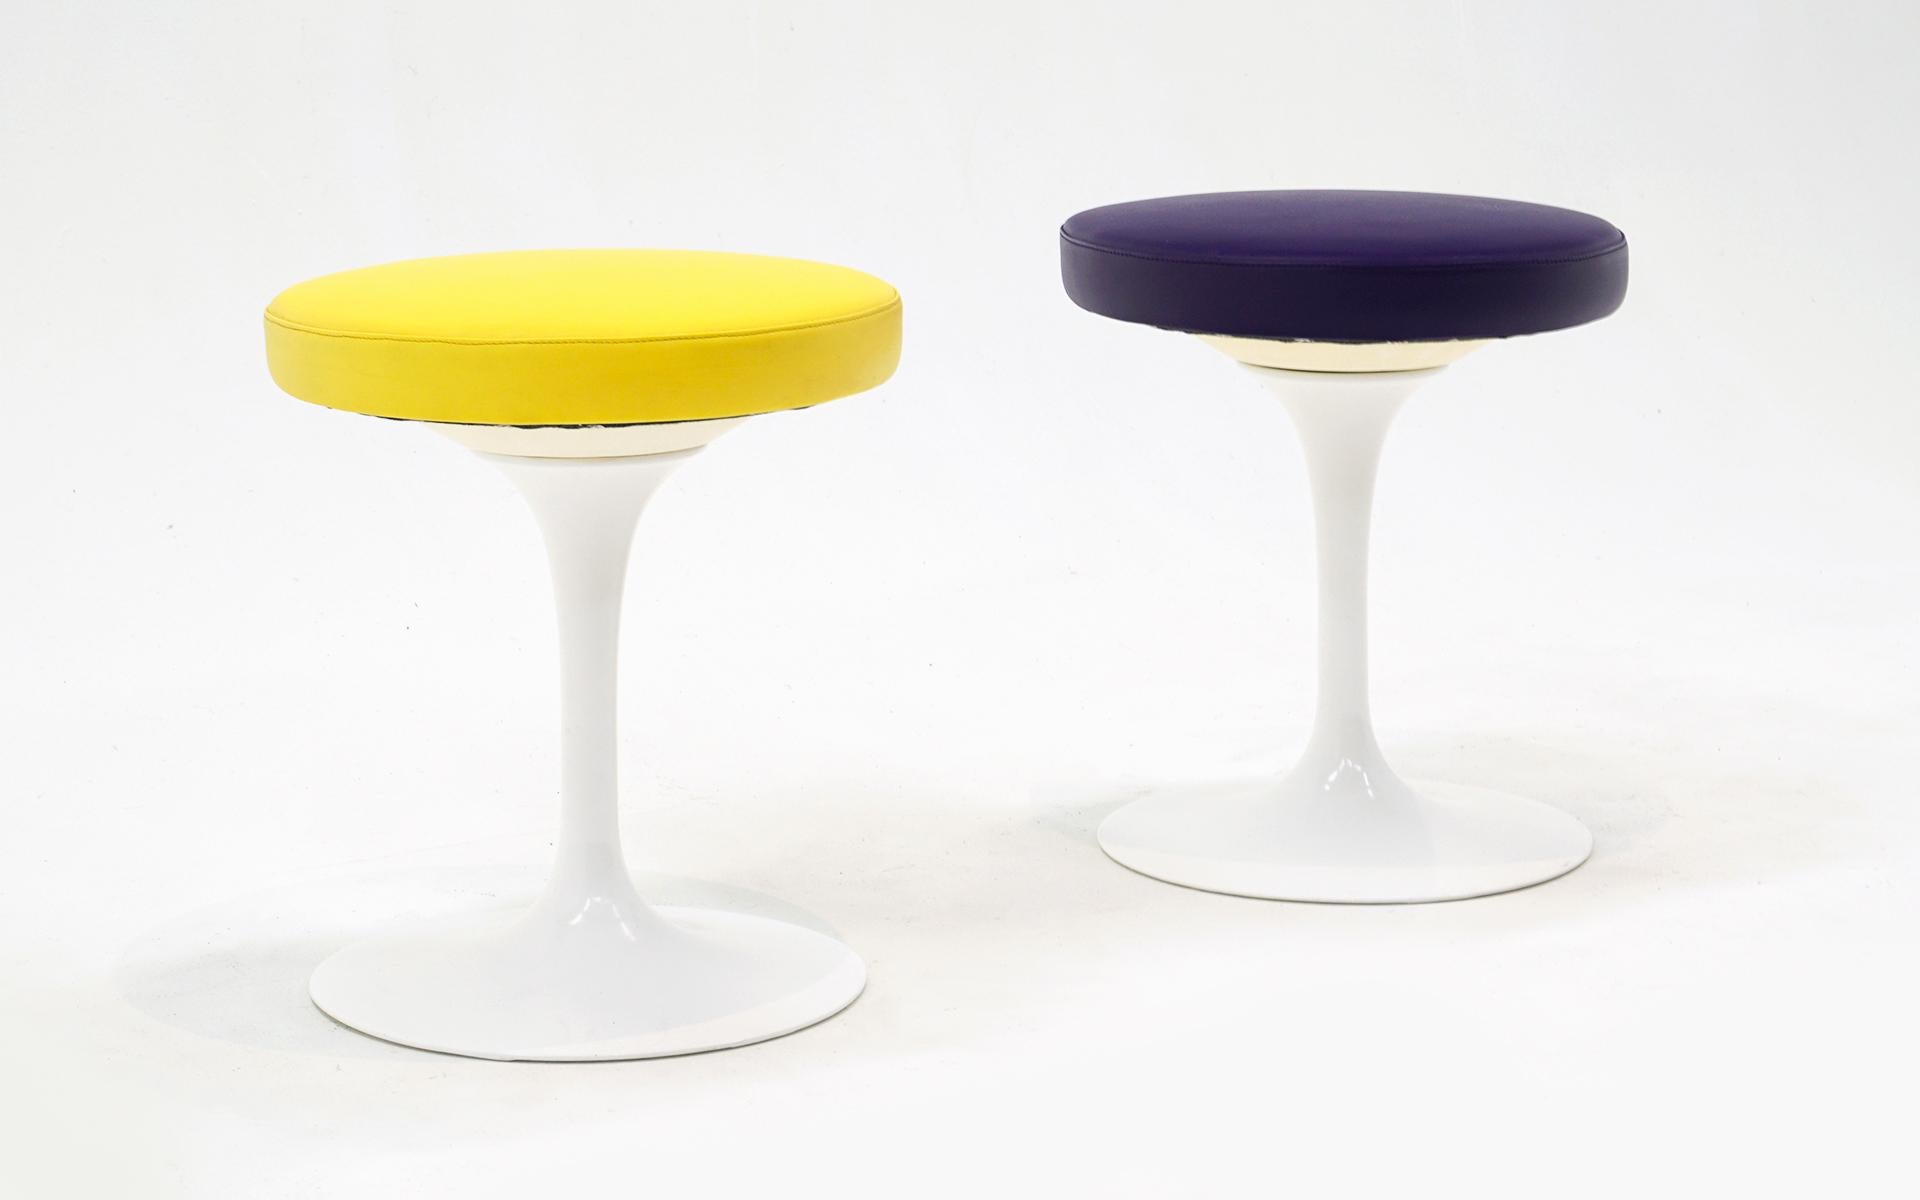 Mid-Century Modern Two Swivel Tulip Stools by Eero Saarinen for Knoll, Yellow and Purple, Signed For Sale